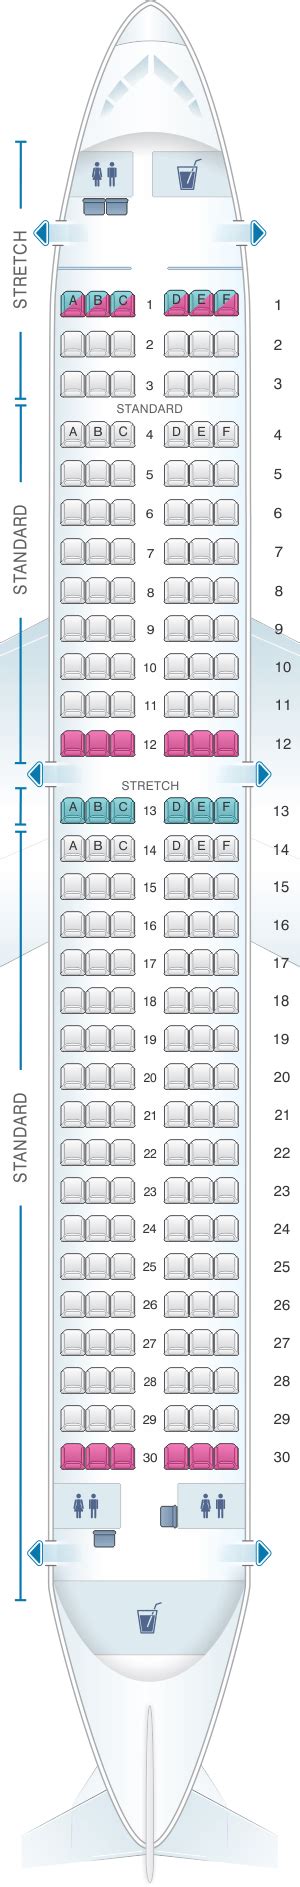 Frontier Airlines Seating Chart Airbus A321 Review Home Decor